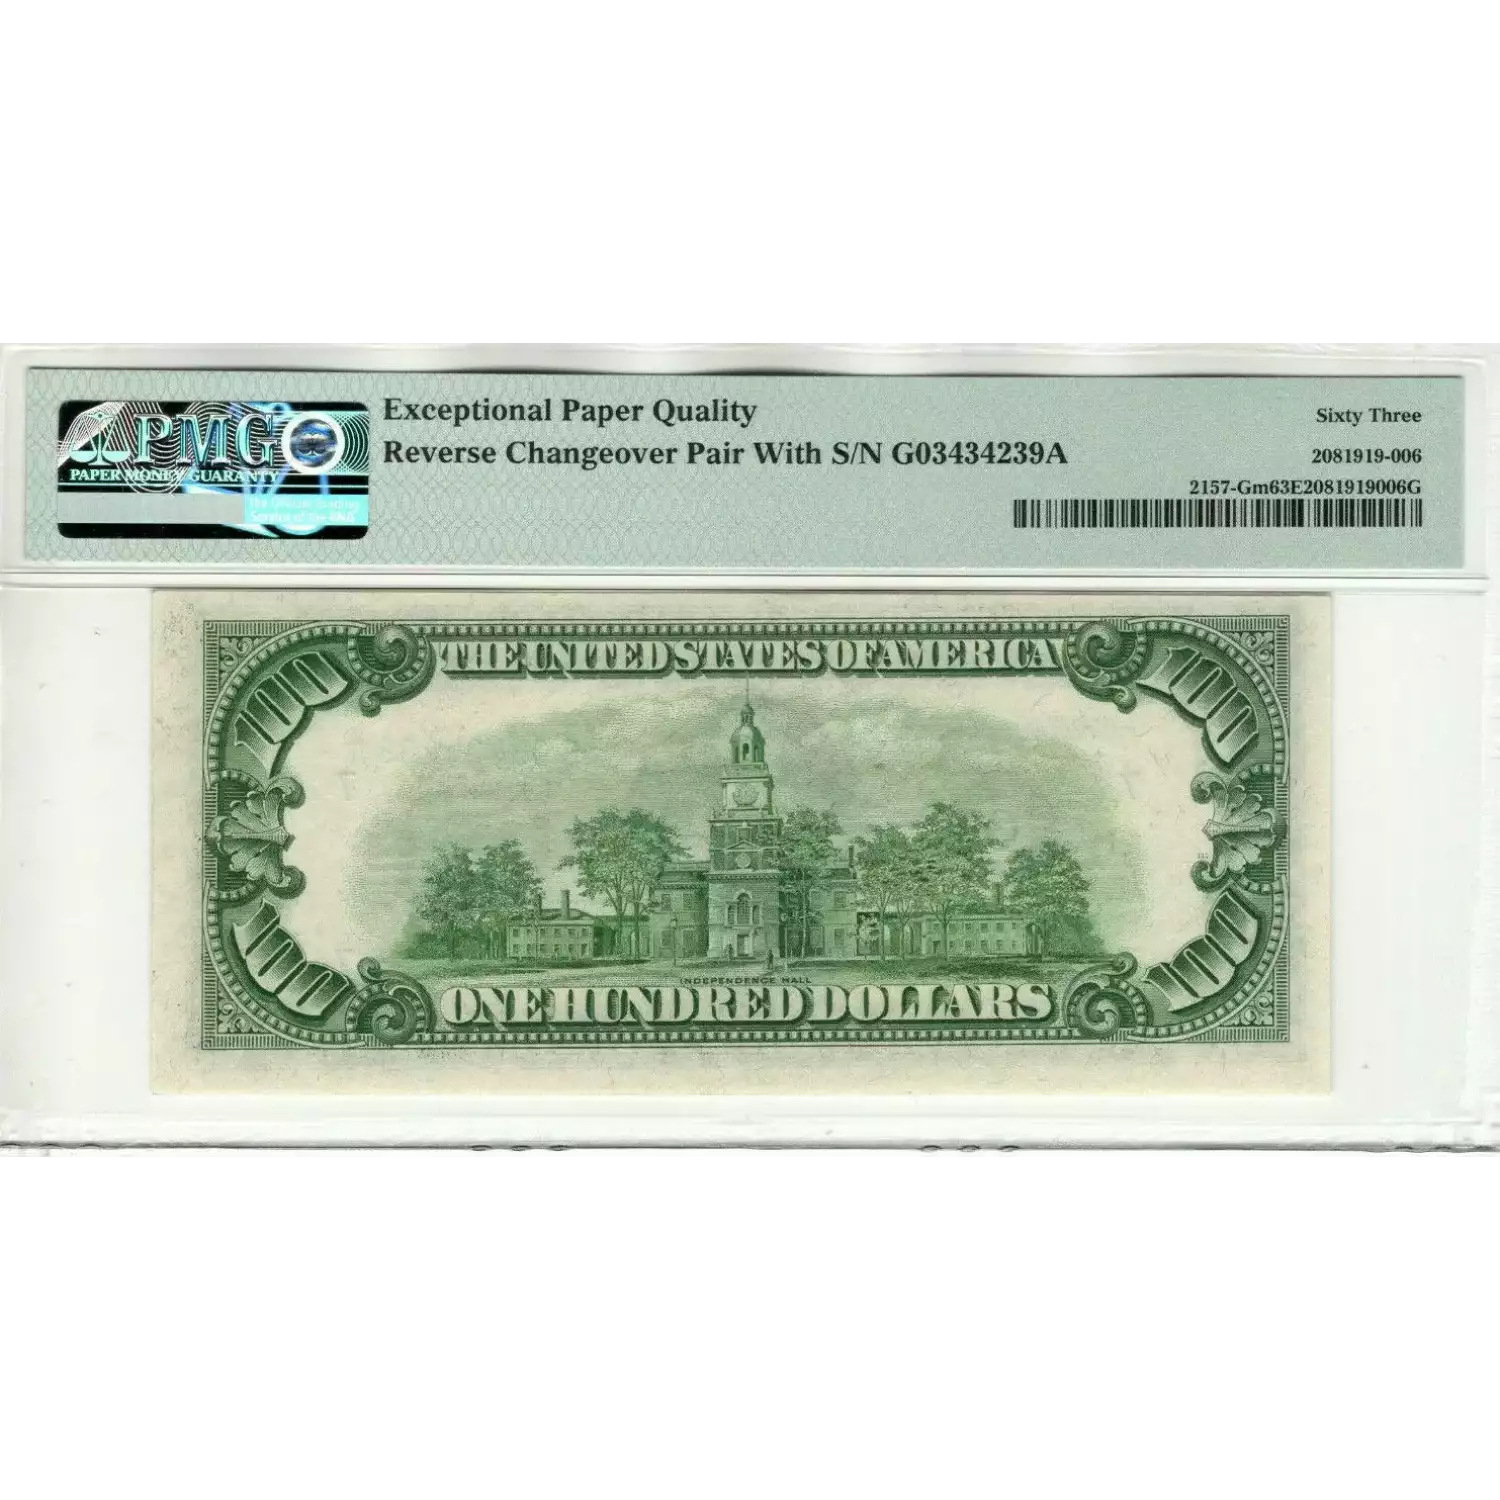 $100 1950  Small Size $100 Federal Reserve Notes 2157-Gm (6)